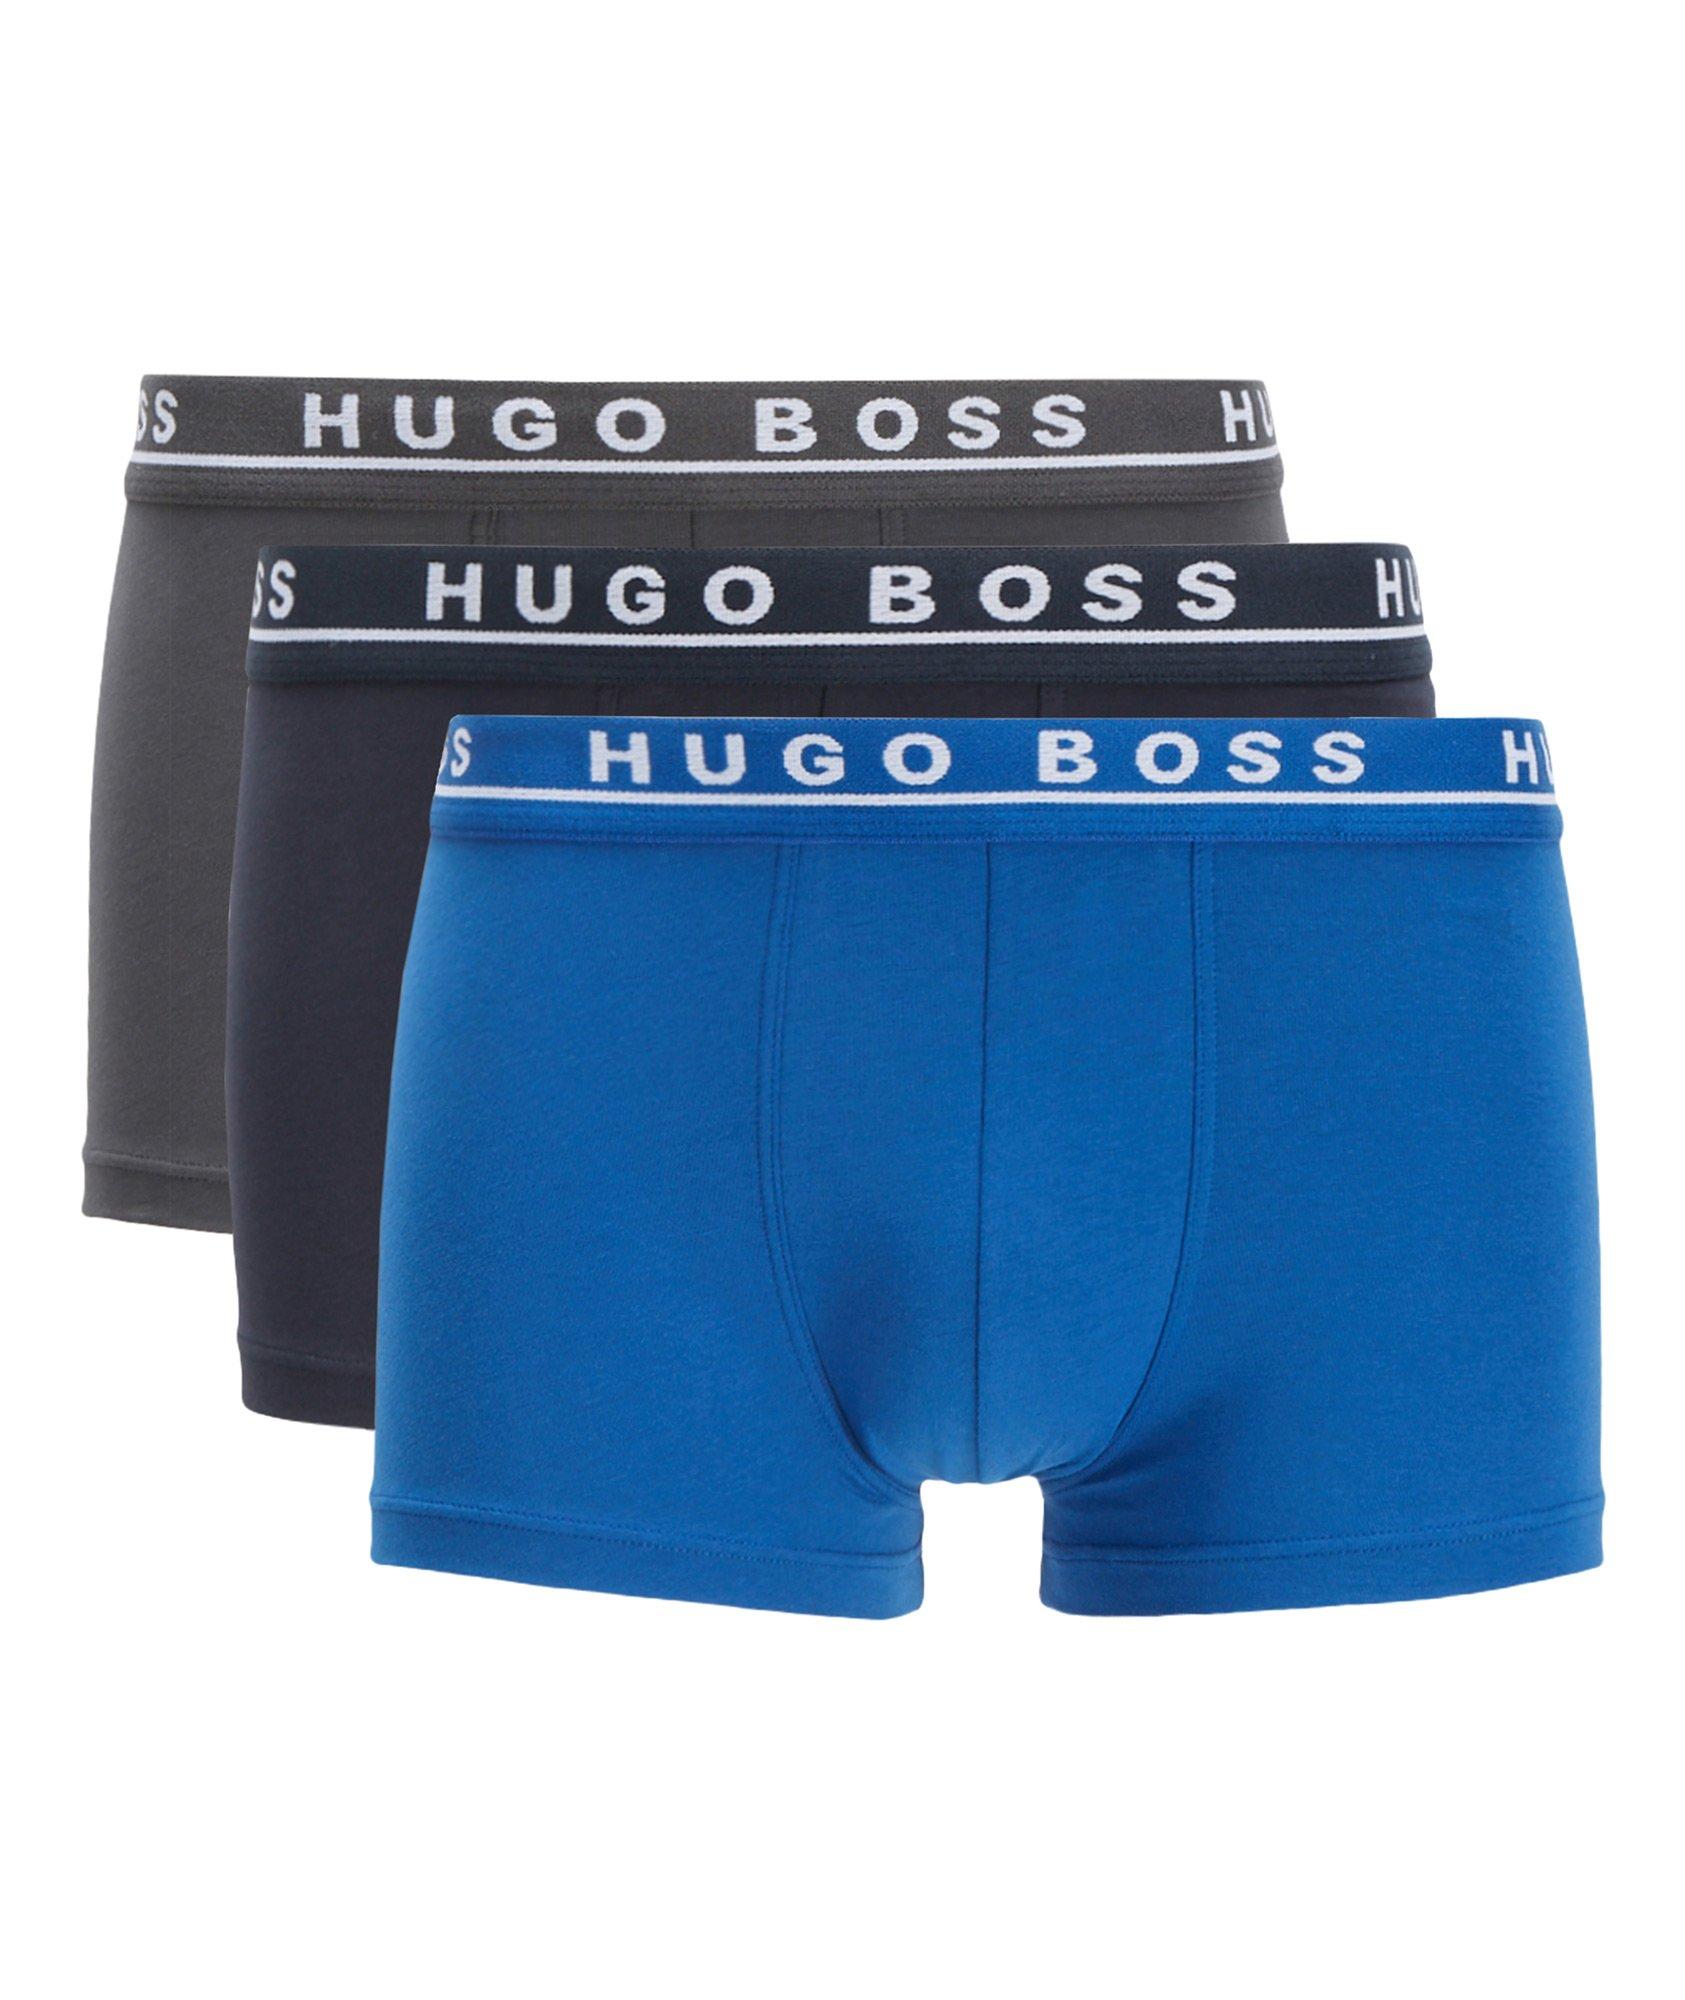 3-Pack Stretch-Cotton Boxers image 0